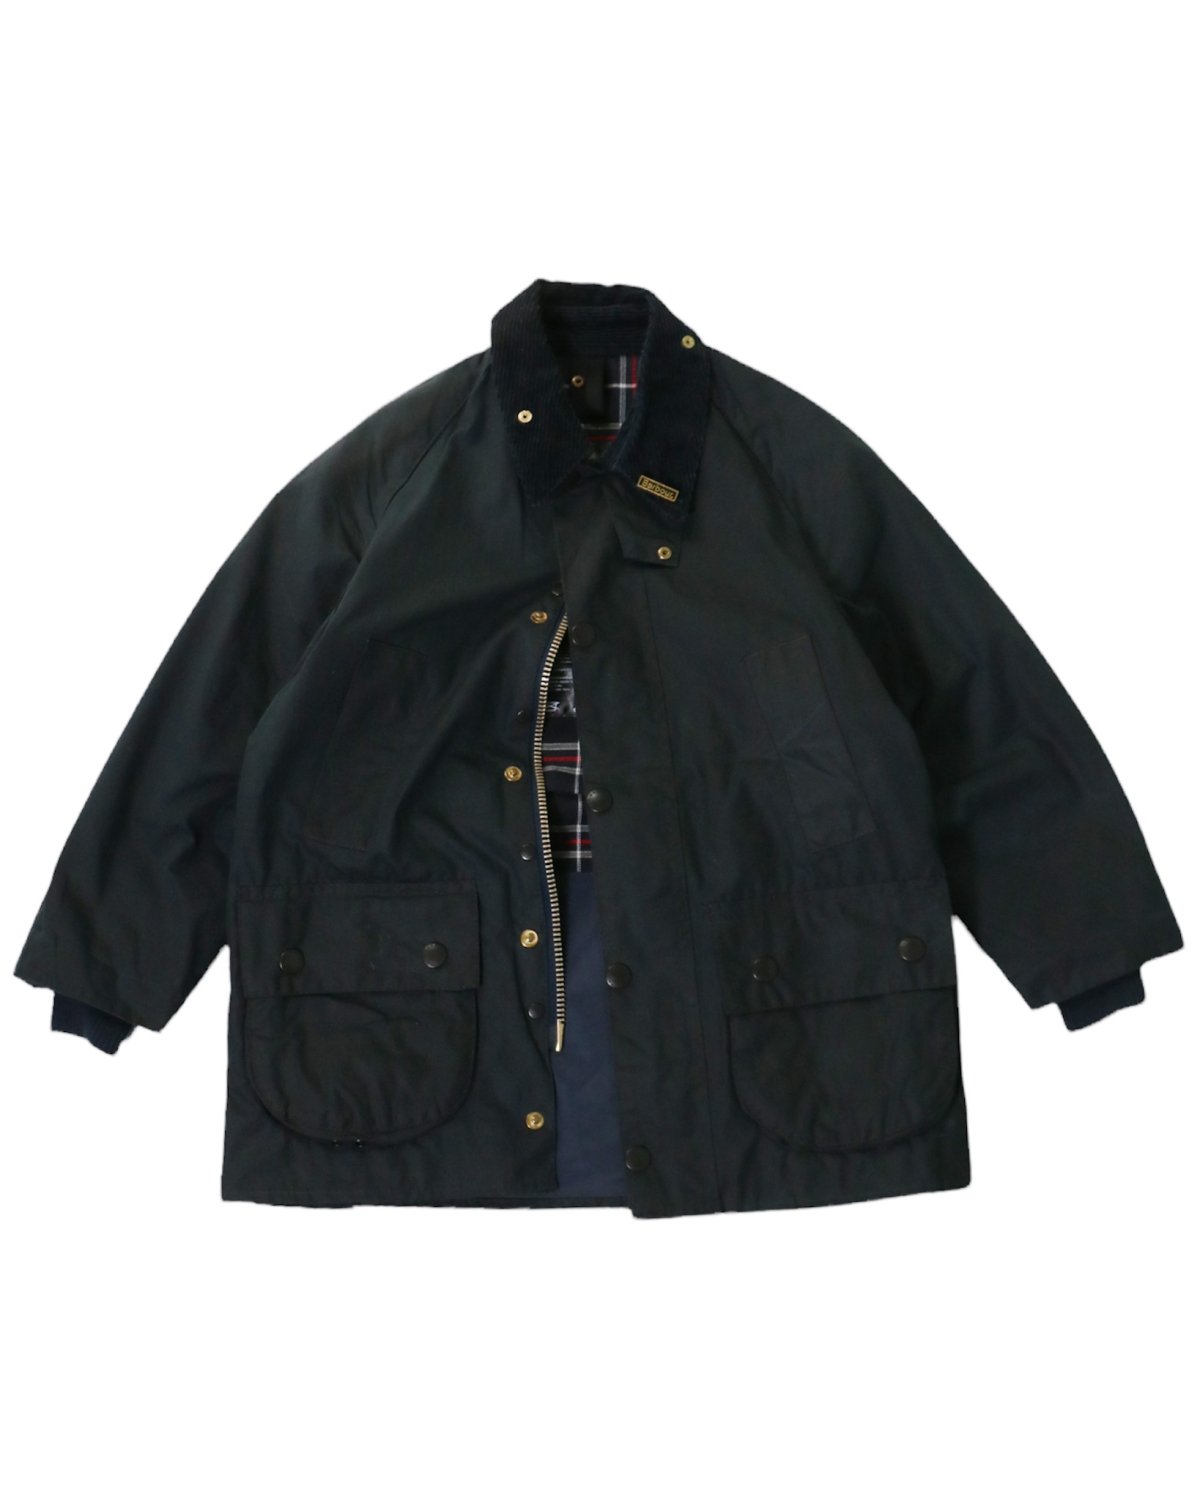 “Barbour” BEDALE